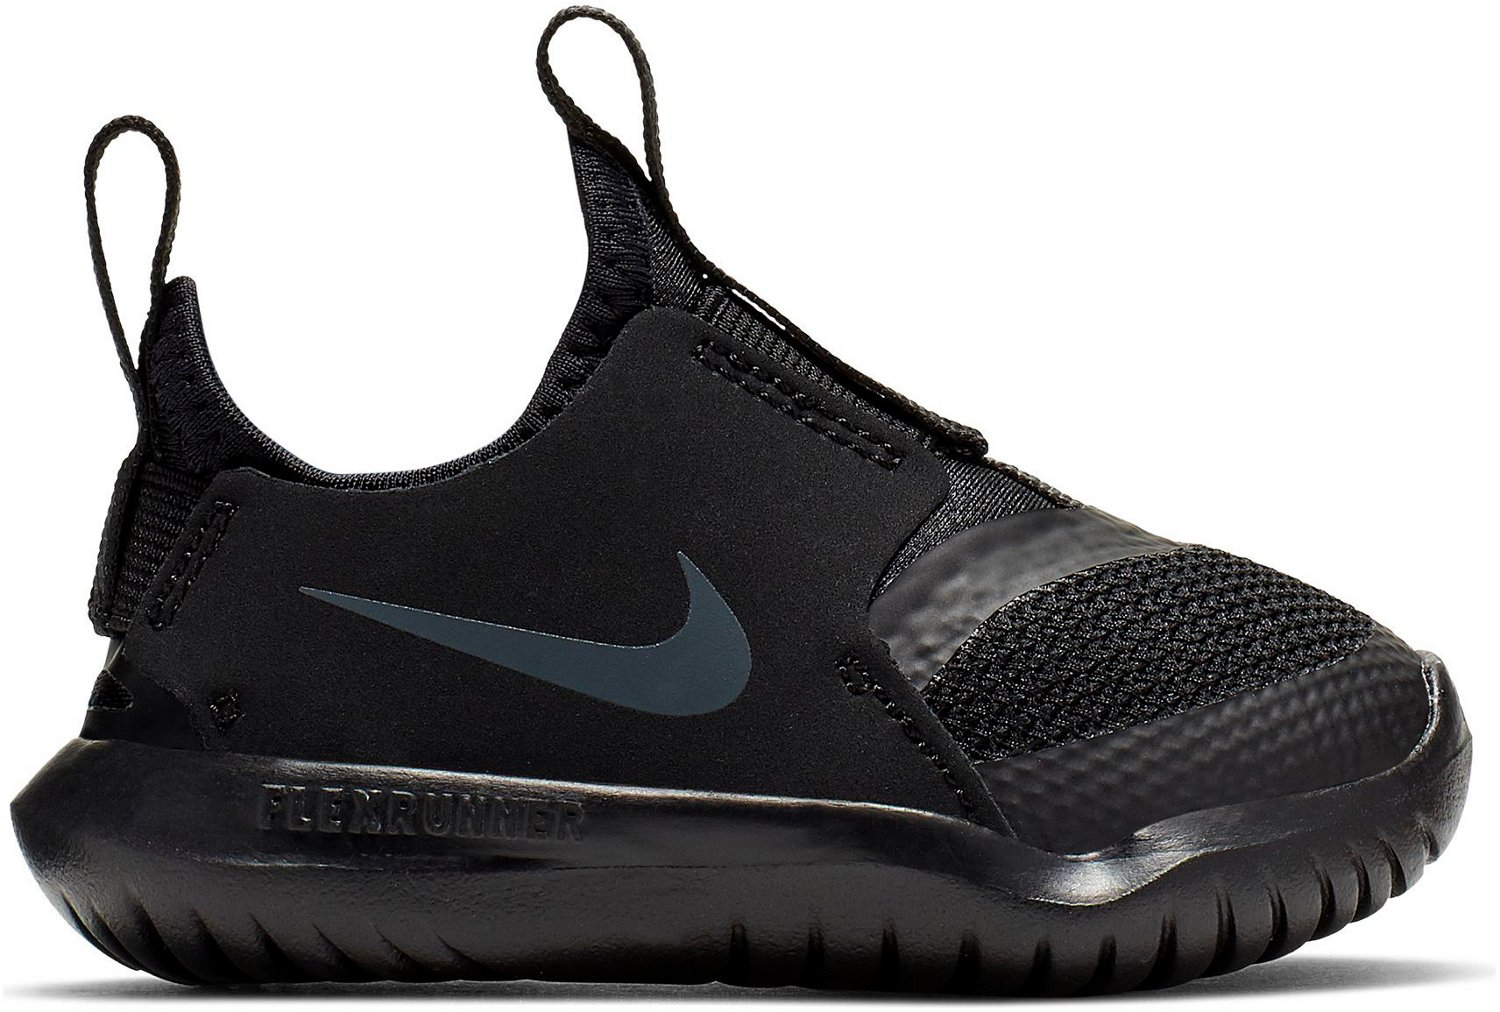 Nike Toddlers' Flex Runner Shoes | Academy